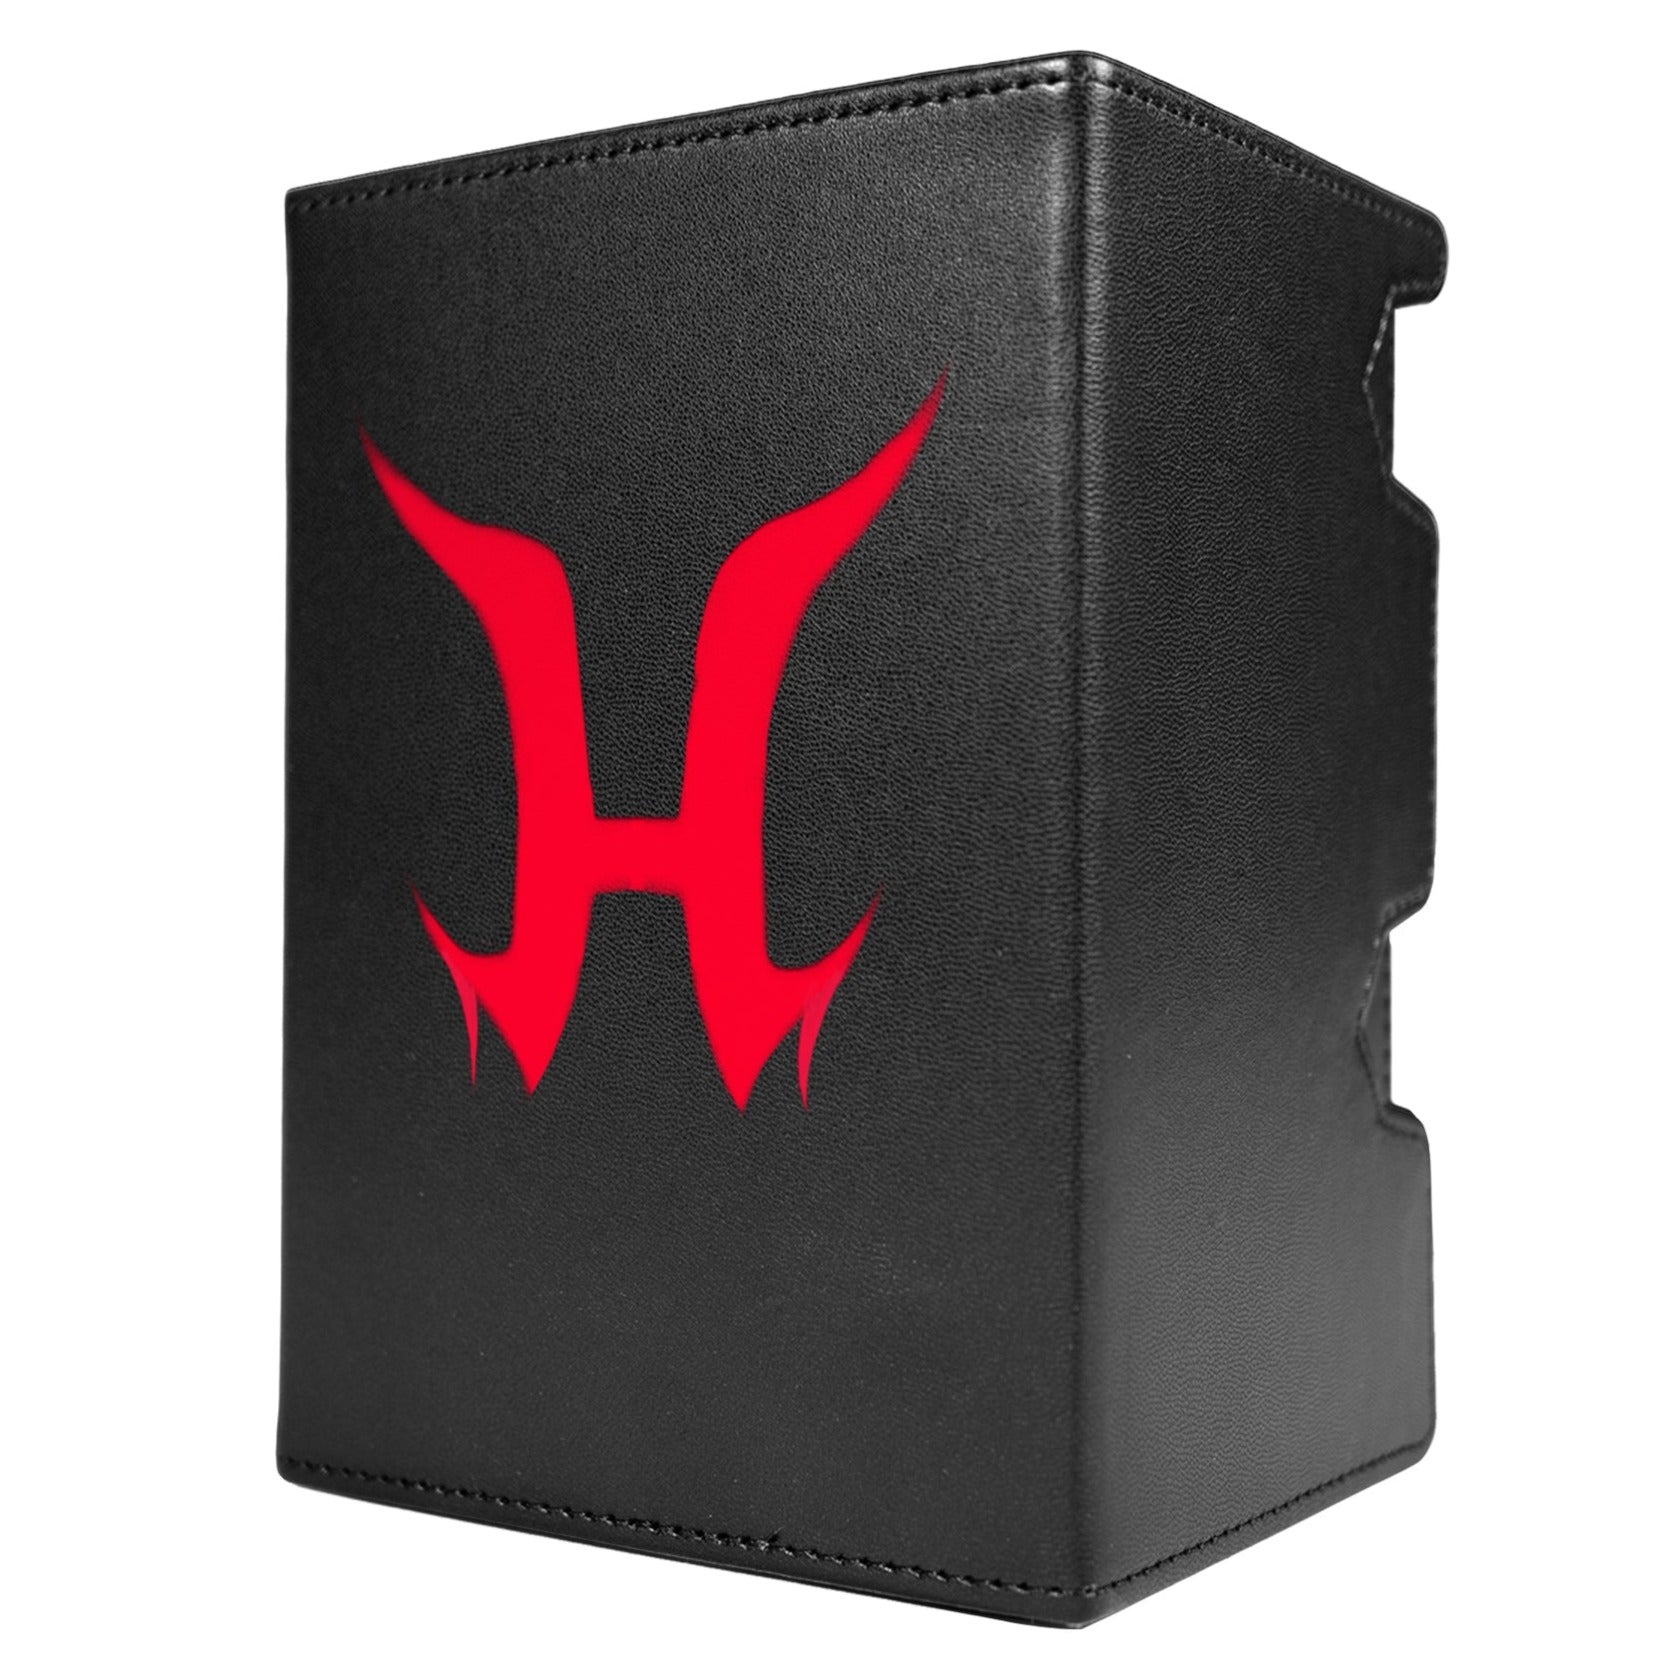 Custom And Luxury Deck Boxes For Magic: The Gathering, Pokemon